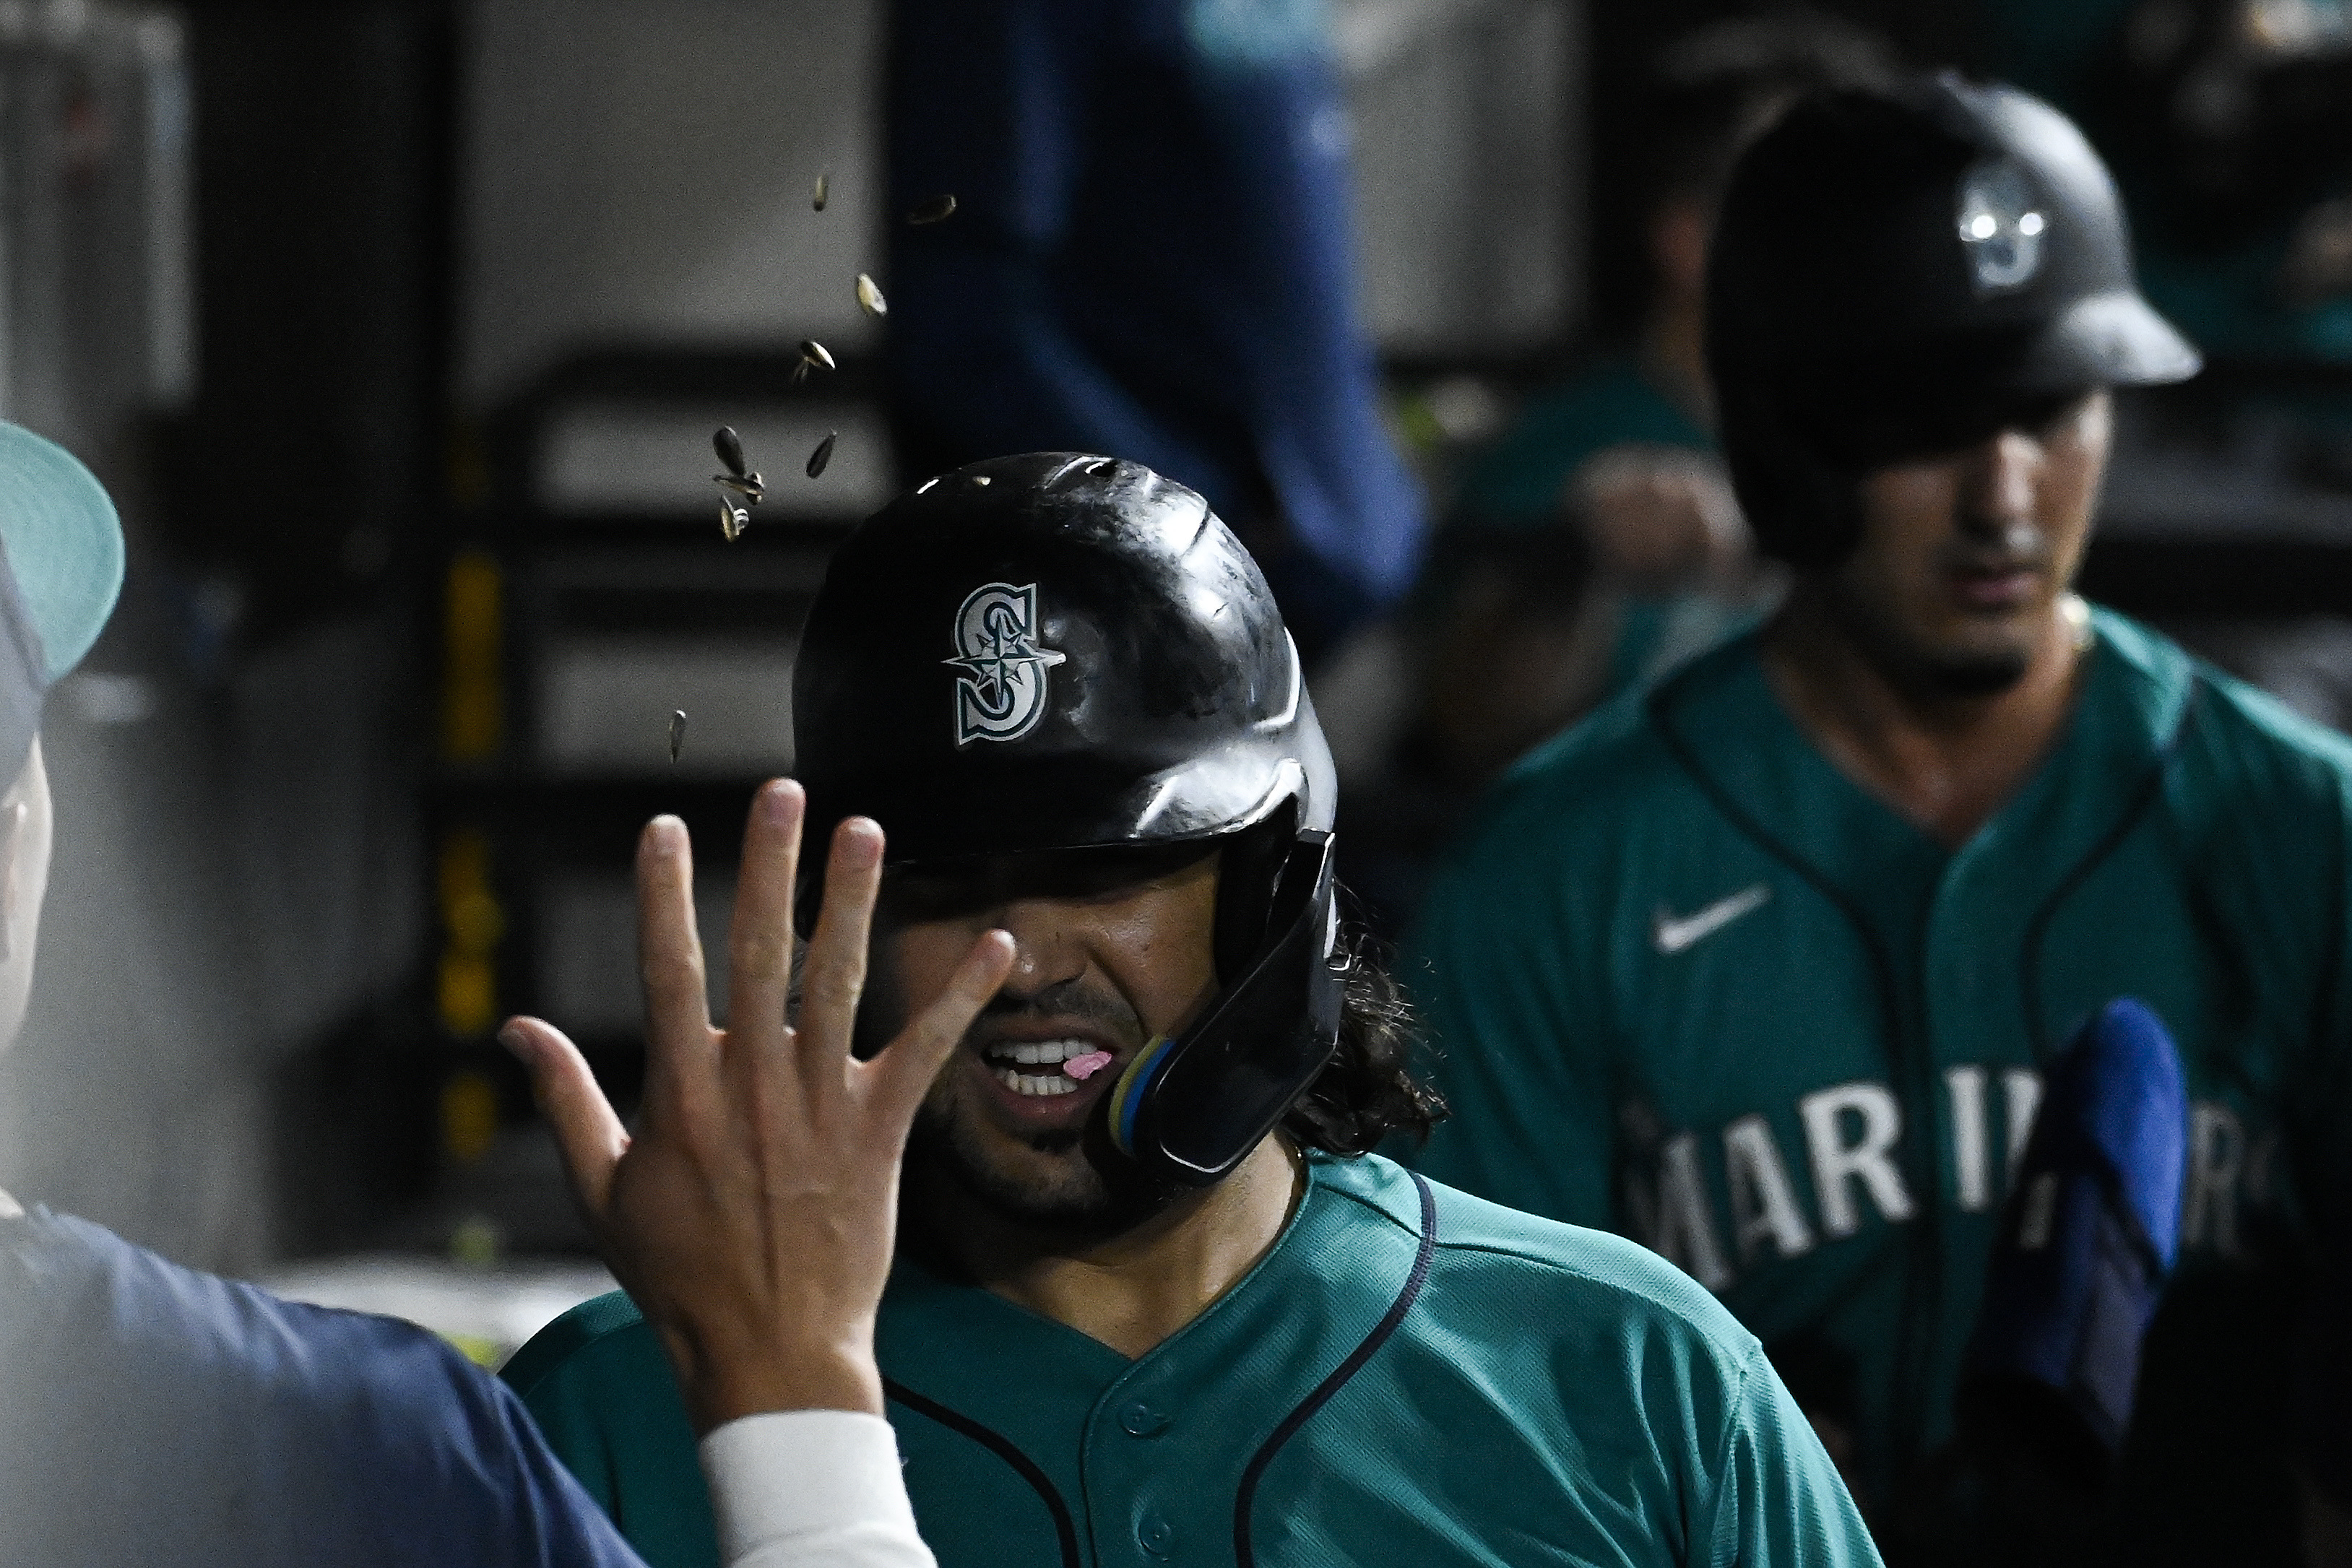 Cal Raleigh stars as Seattle Mariners pound Chicago White Sox 14-2 for 7th  straight win - The San Diego Union-Tribune